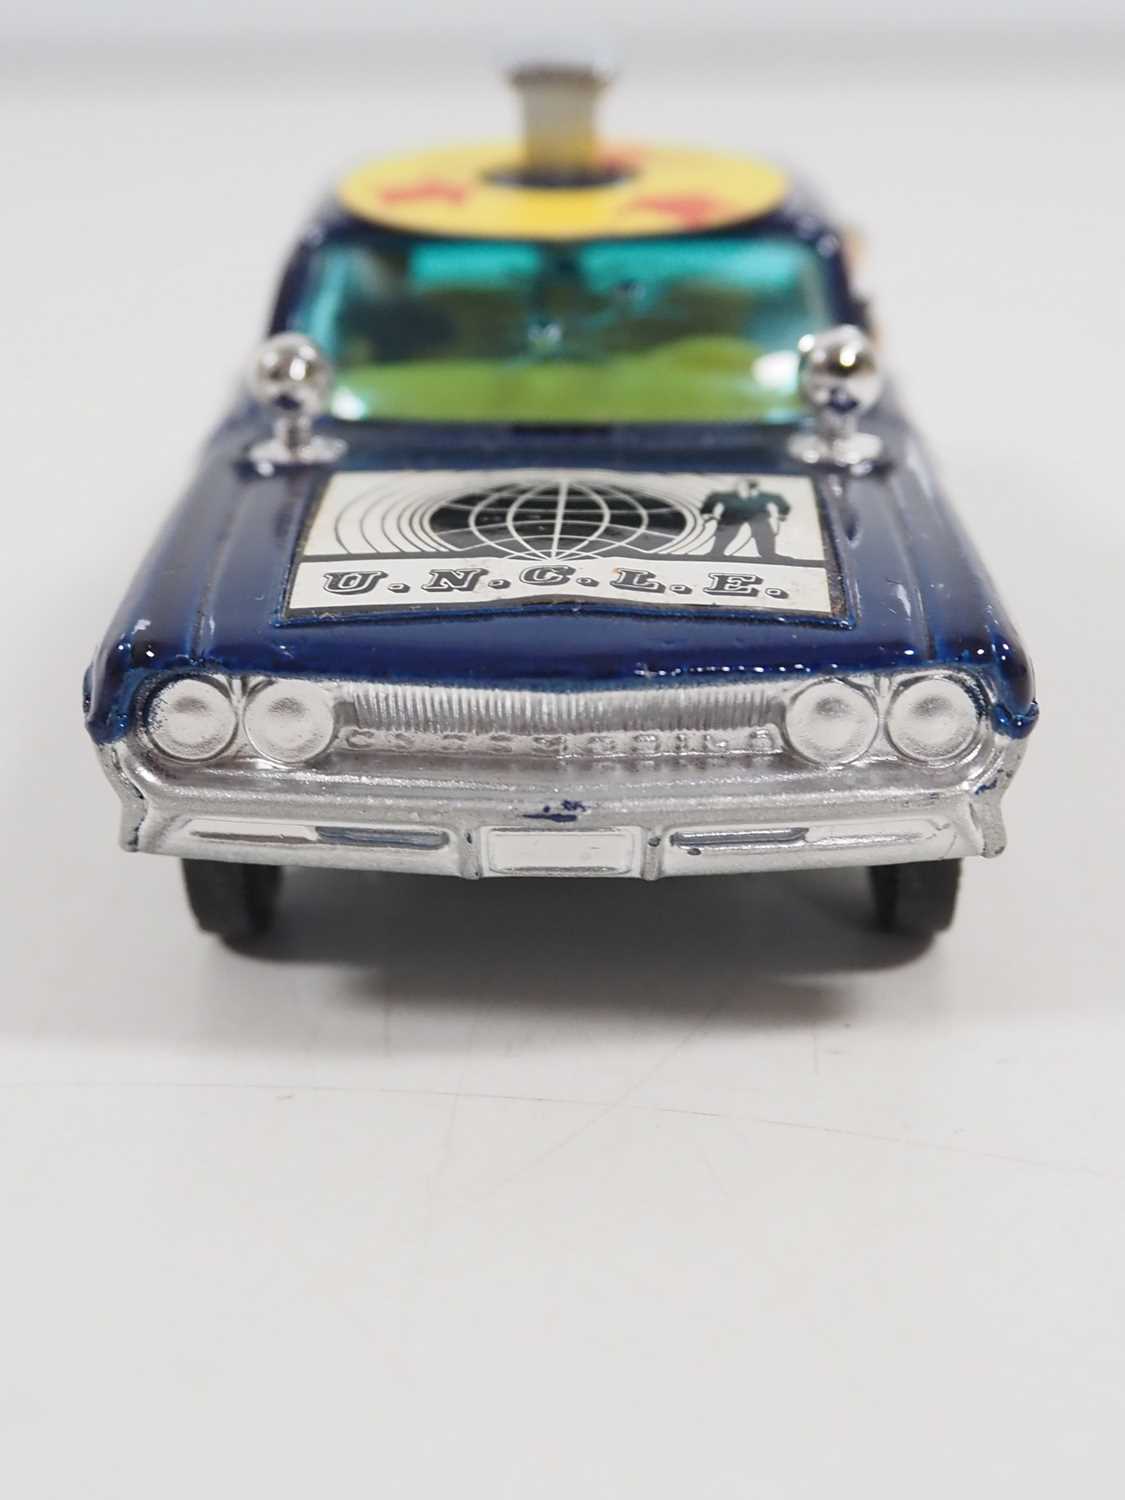 A CORGI 497 diecast Thrush-Buster Oldsmobile from 'The Man From U.N.C.L.E' - blue metallic version - - Image 6 of 9